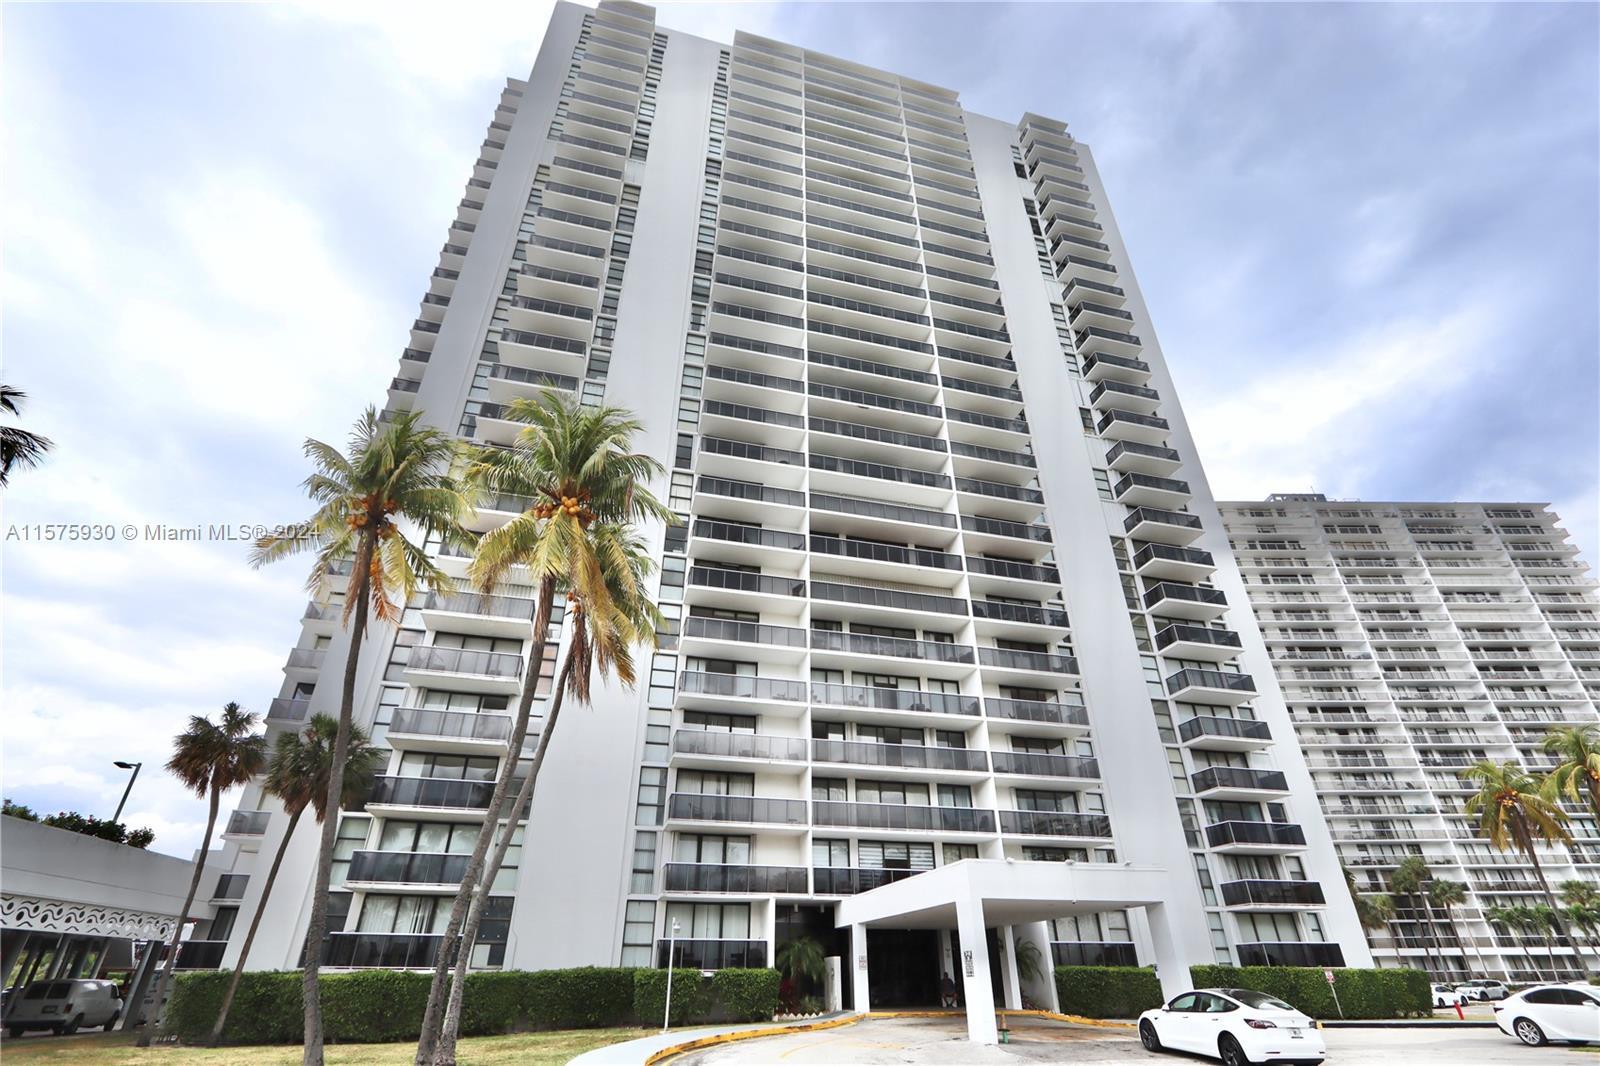 Photo of 3675 N Country Club Dr #401 in Aventura, FL